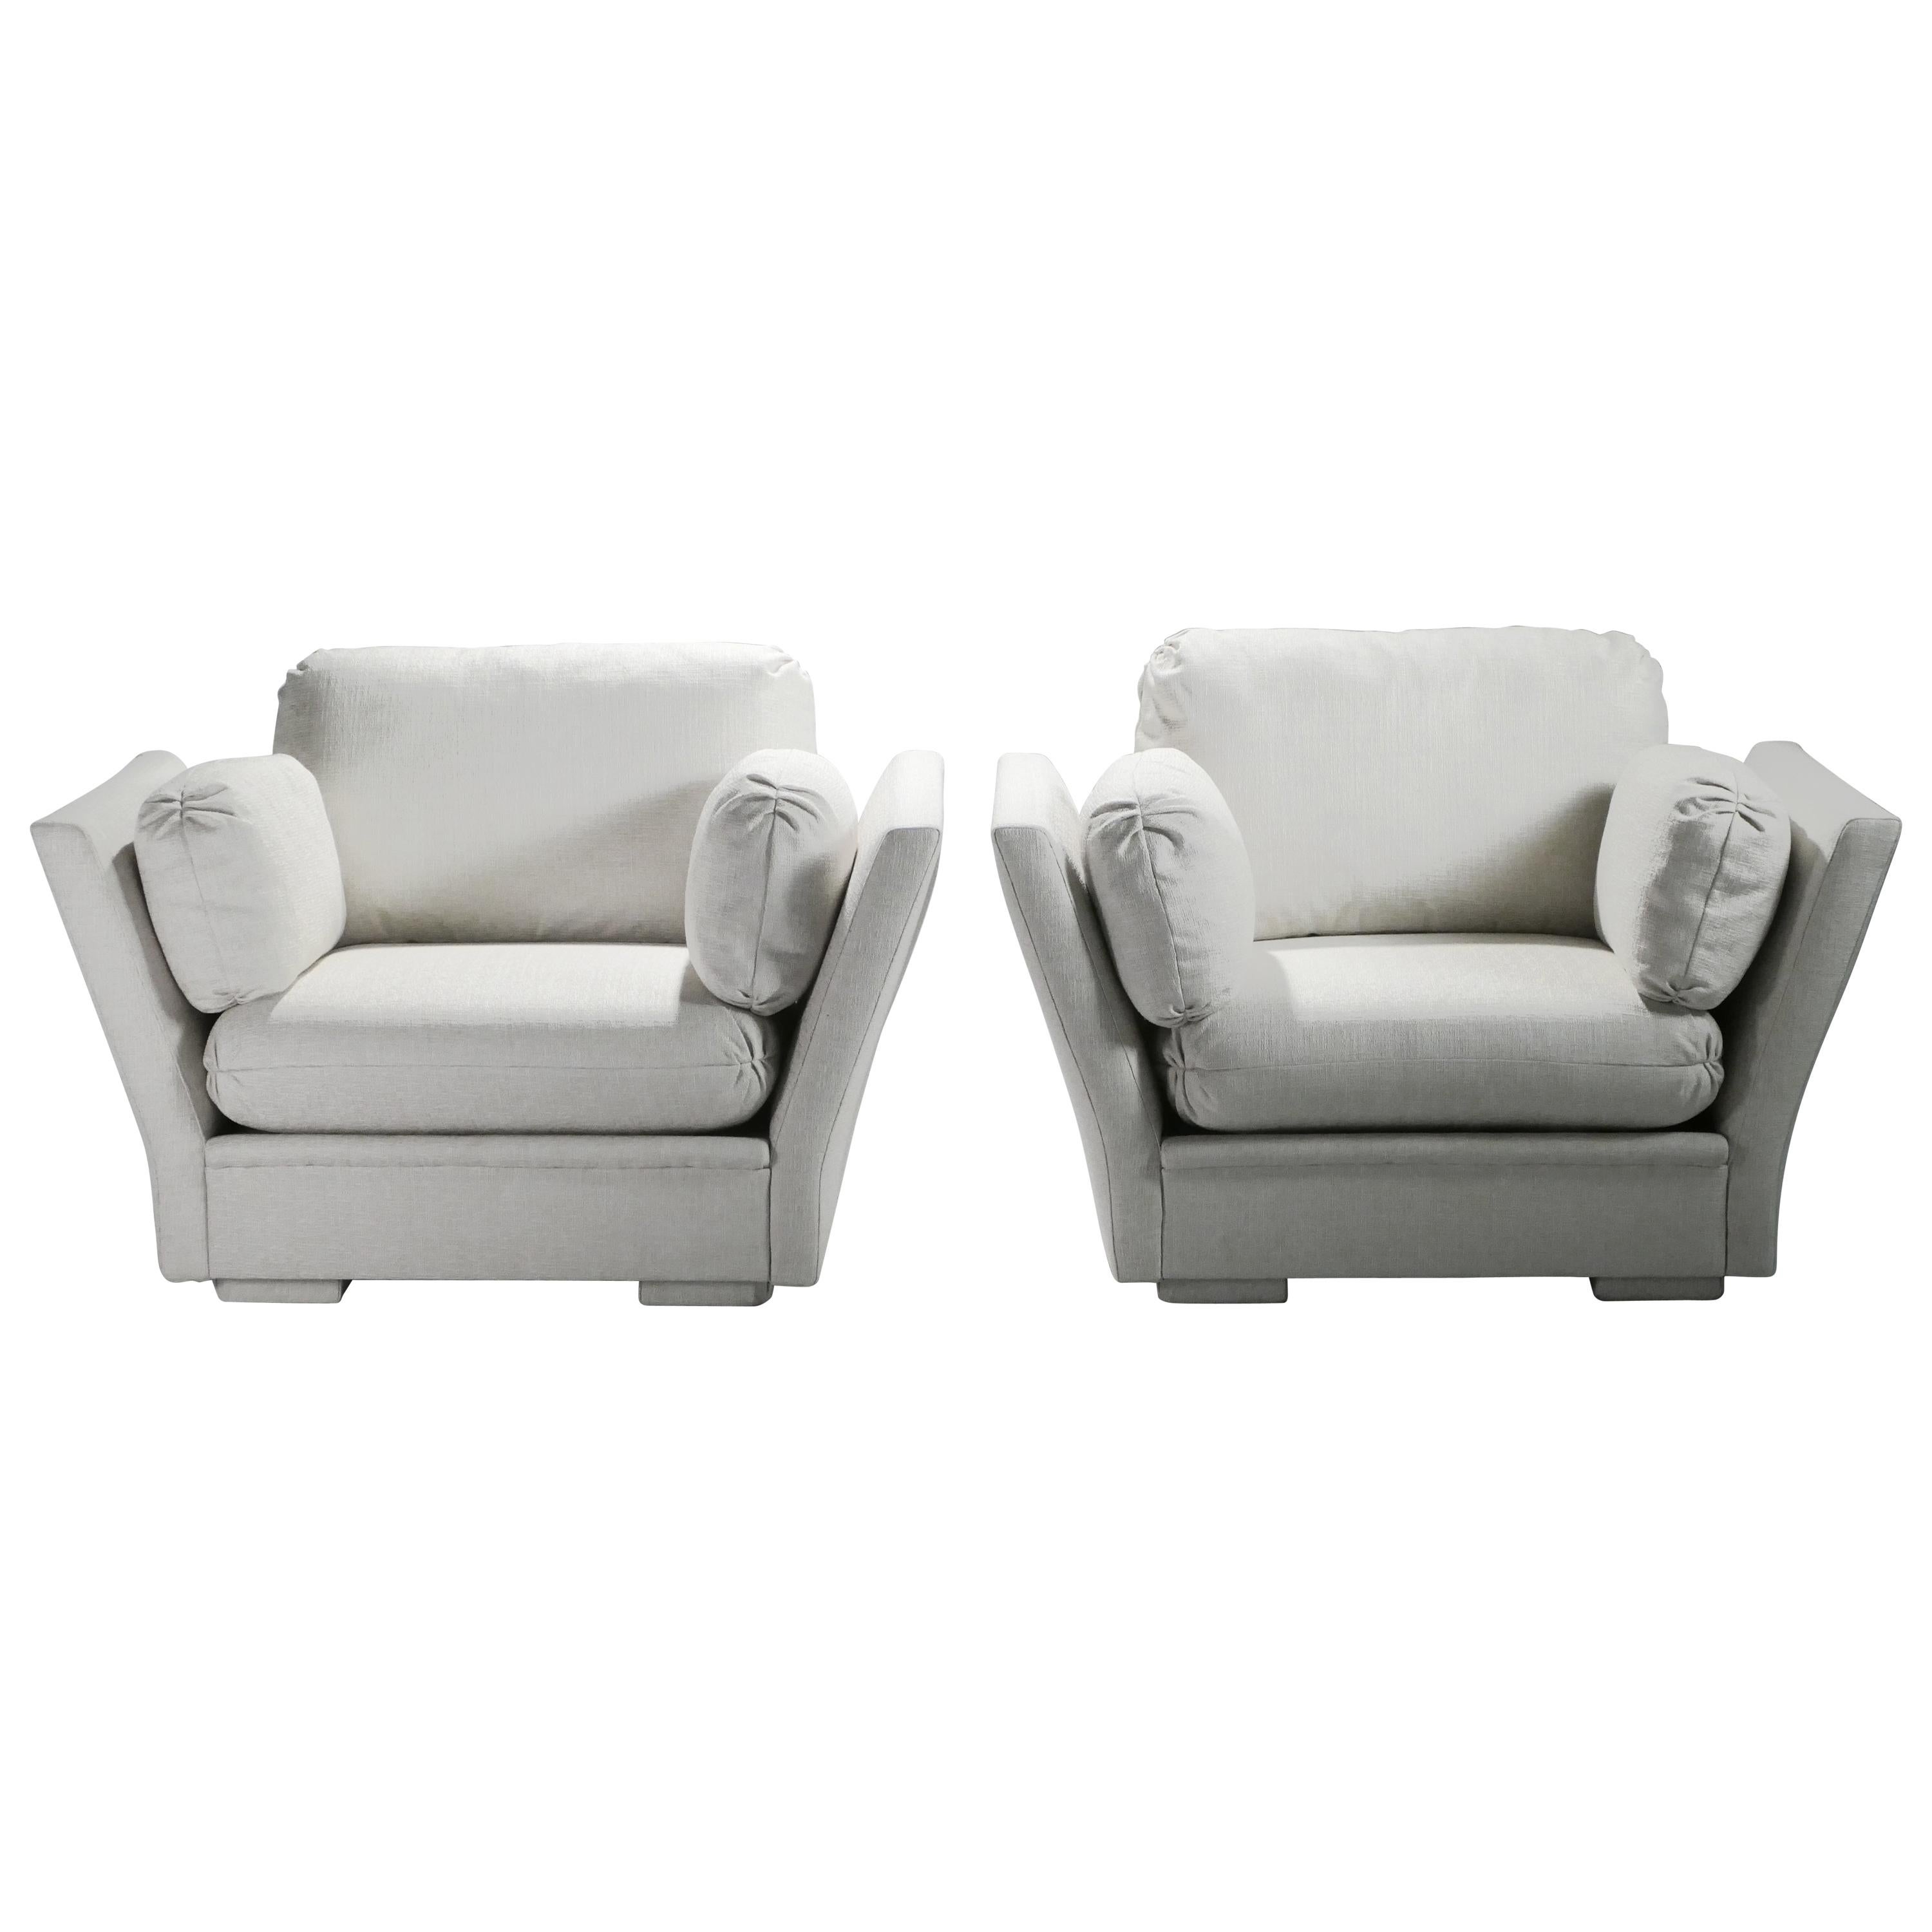 As inviting as they are stylish, this pair of Maison Jansen armchairs reflects the brand’s neoclassical side. The original colossal models have been reupholstered in high-quality cotton Camengo Oleron, in a neutral, sophisticated and textured cream